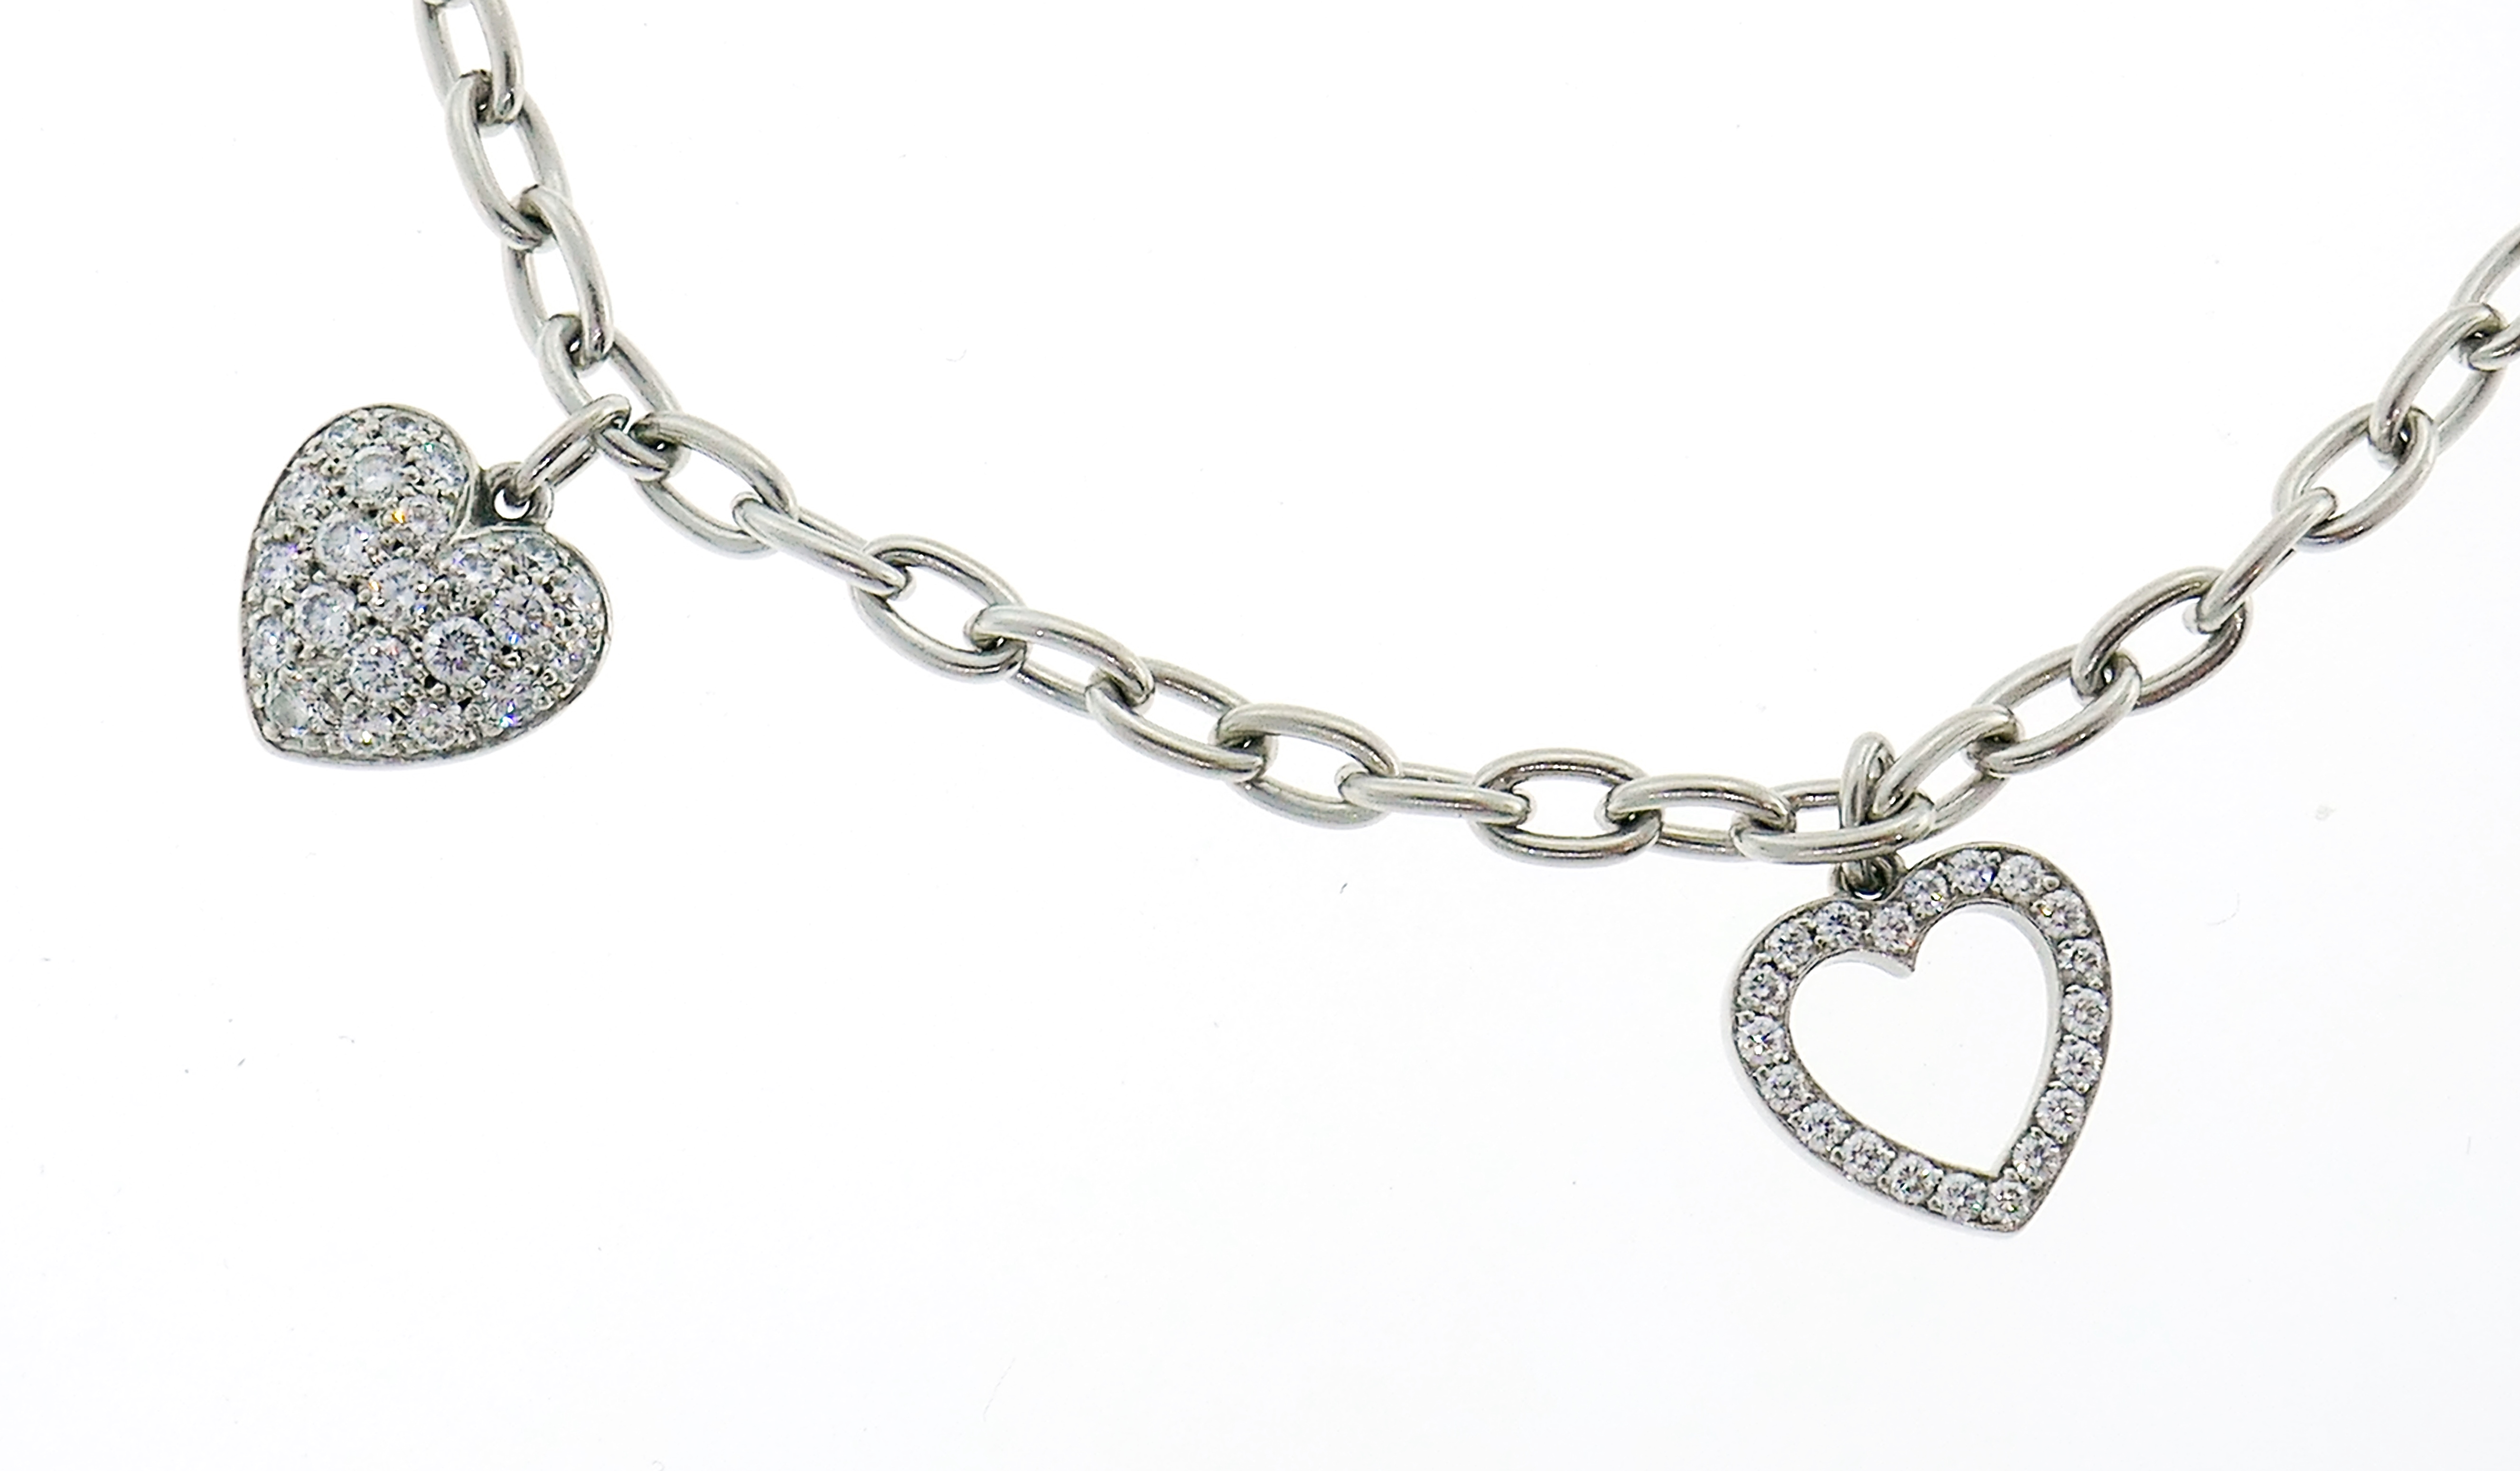 Tiffany and Co. Charm Bracelet with White Diamonds in Platinum at